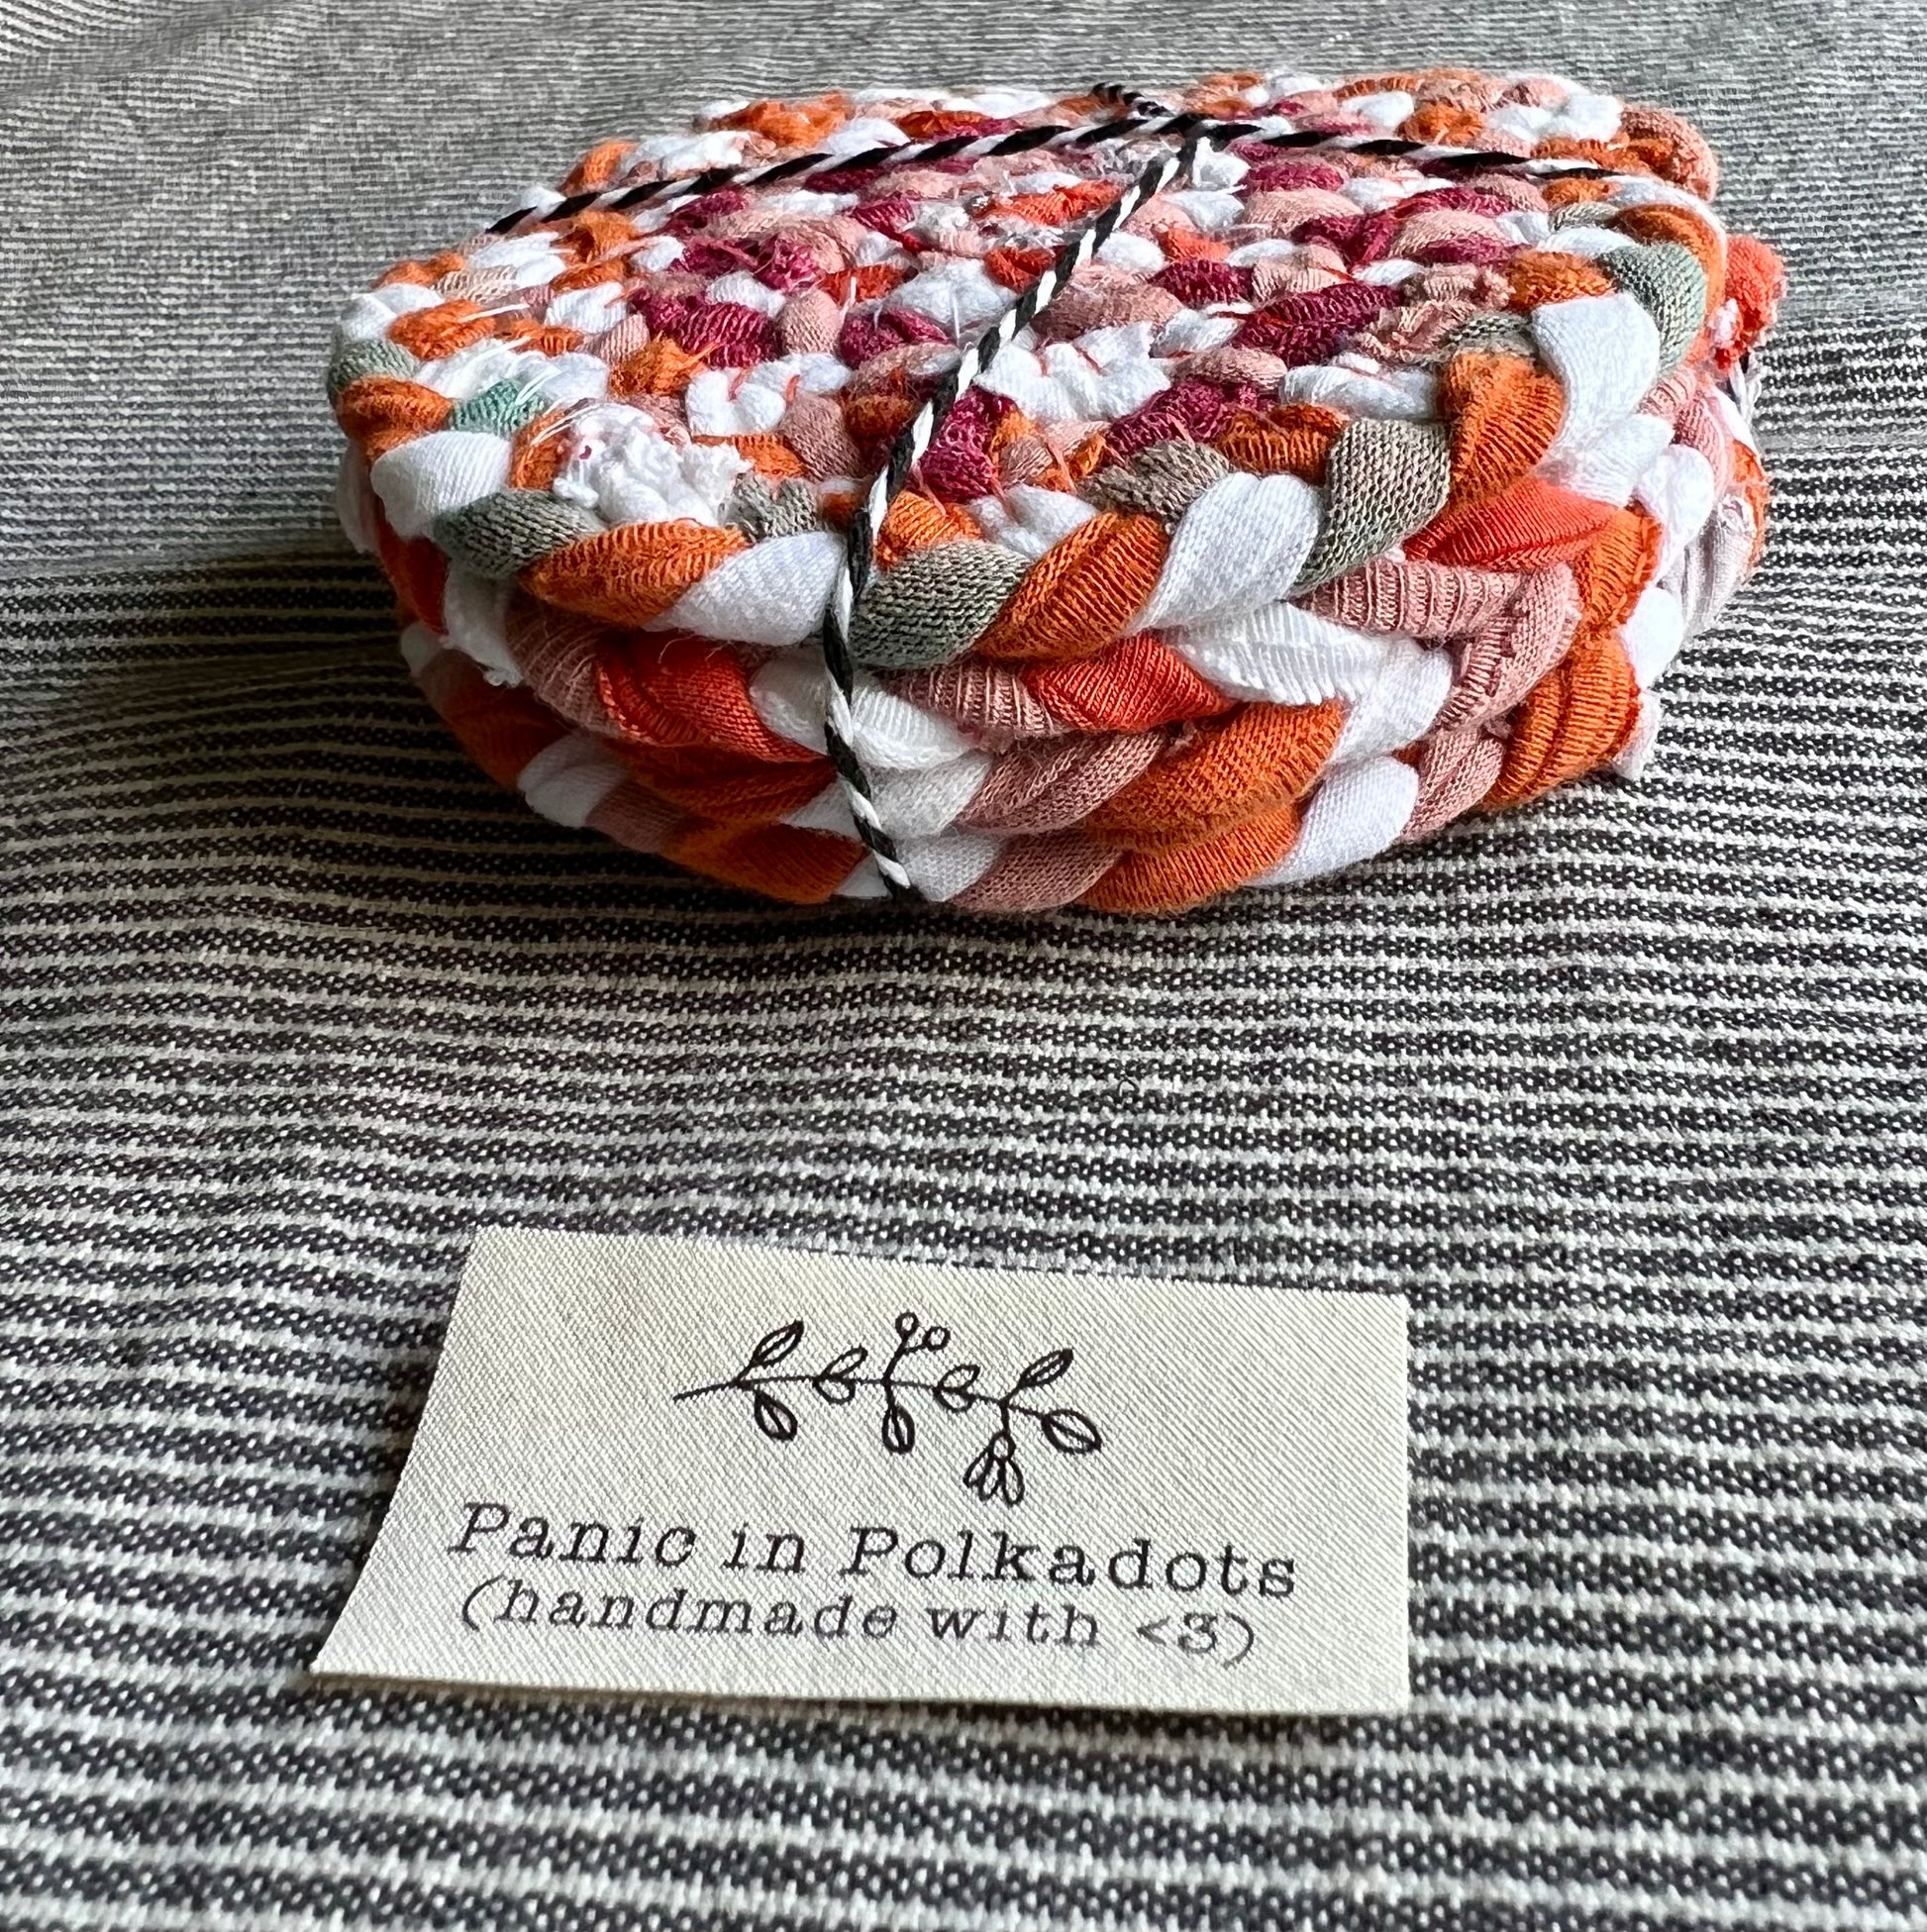 A set of four coasters, bound by string in a stack, with a Panic in Polkadots label in front